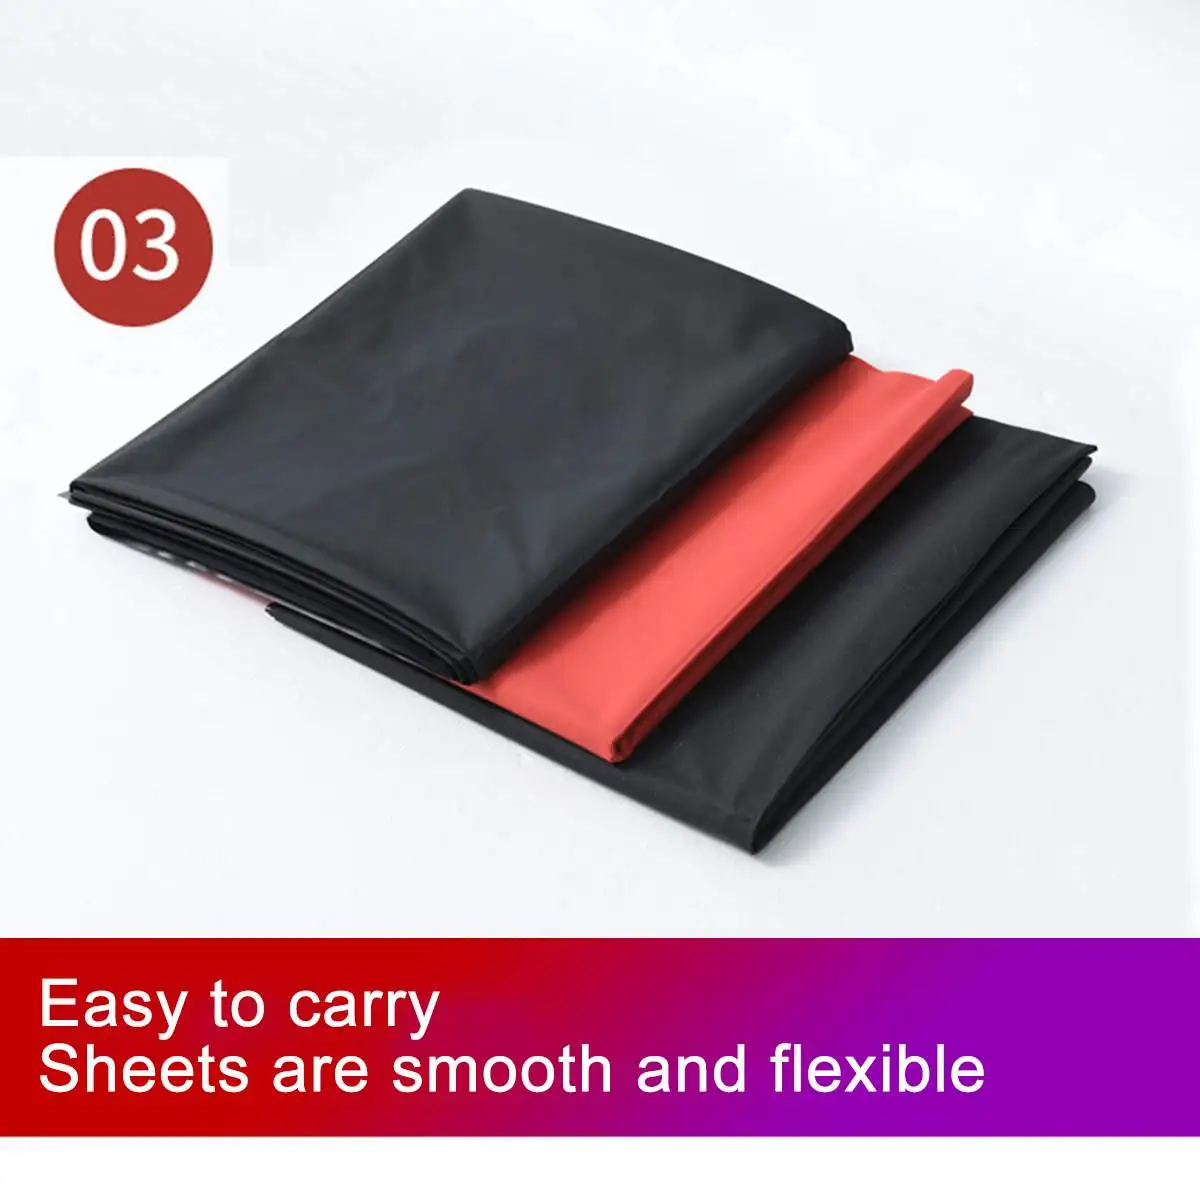 PVC Plastic Adult Sex Bed Sheets Sexy Game Vinyl Waterproof Hypoallergenic Mattress Cover Full Queen King Bedding Sheets